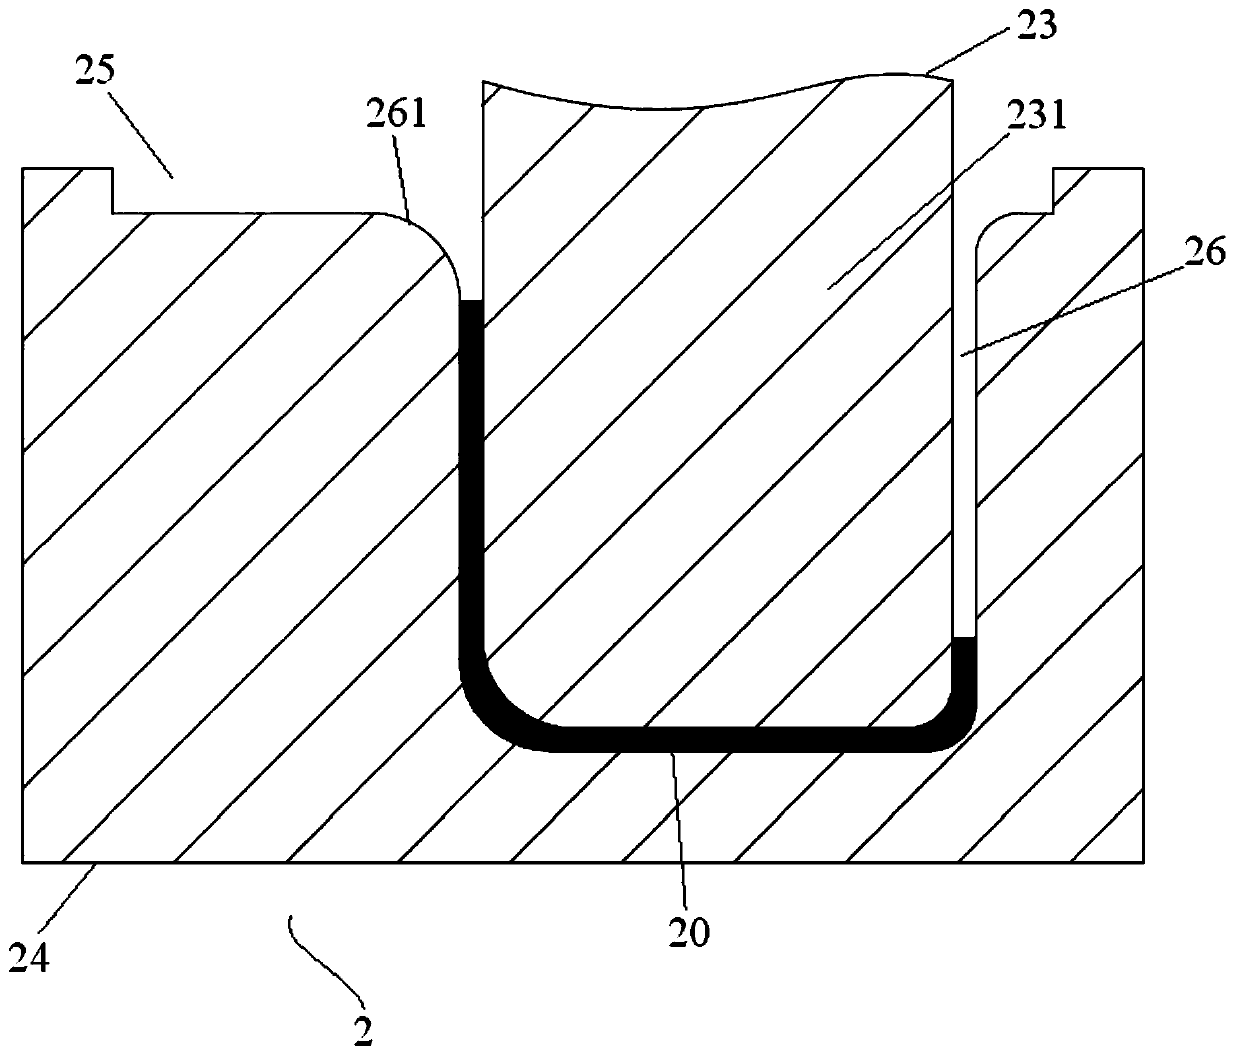 Compression molding method of thermoplastic composite component with I-shaped reinforcing ribs